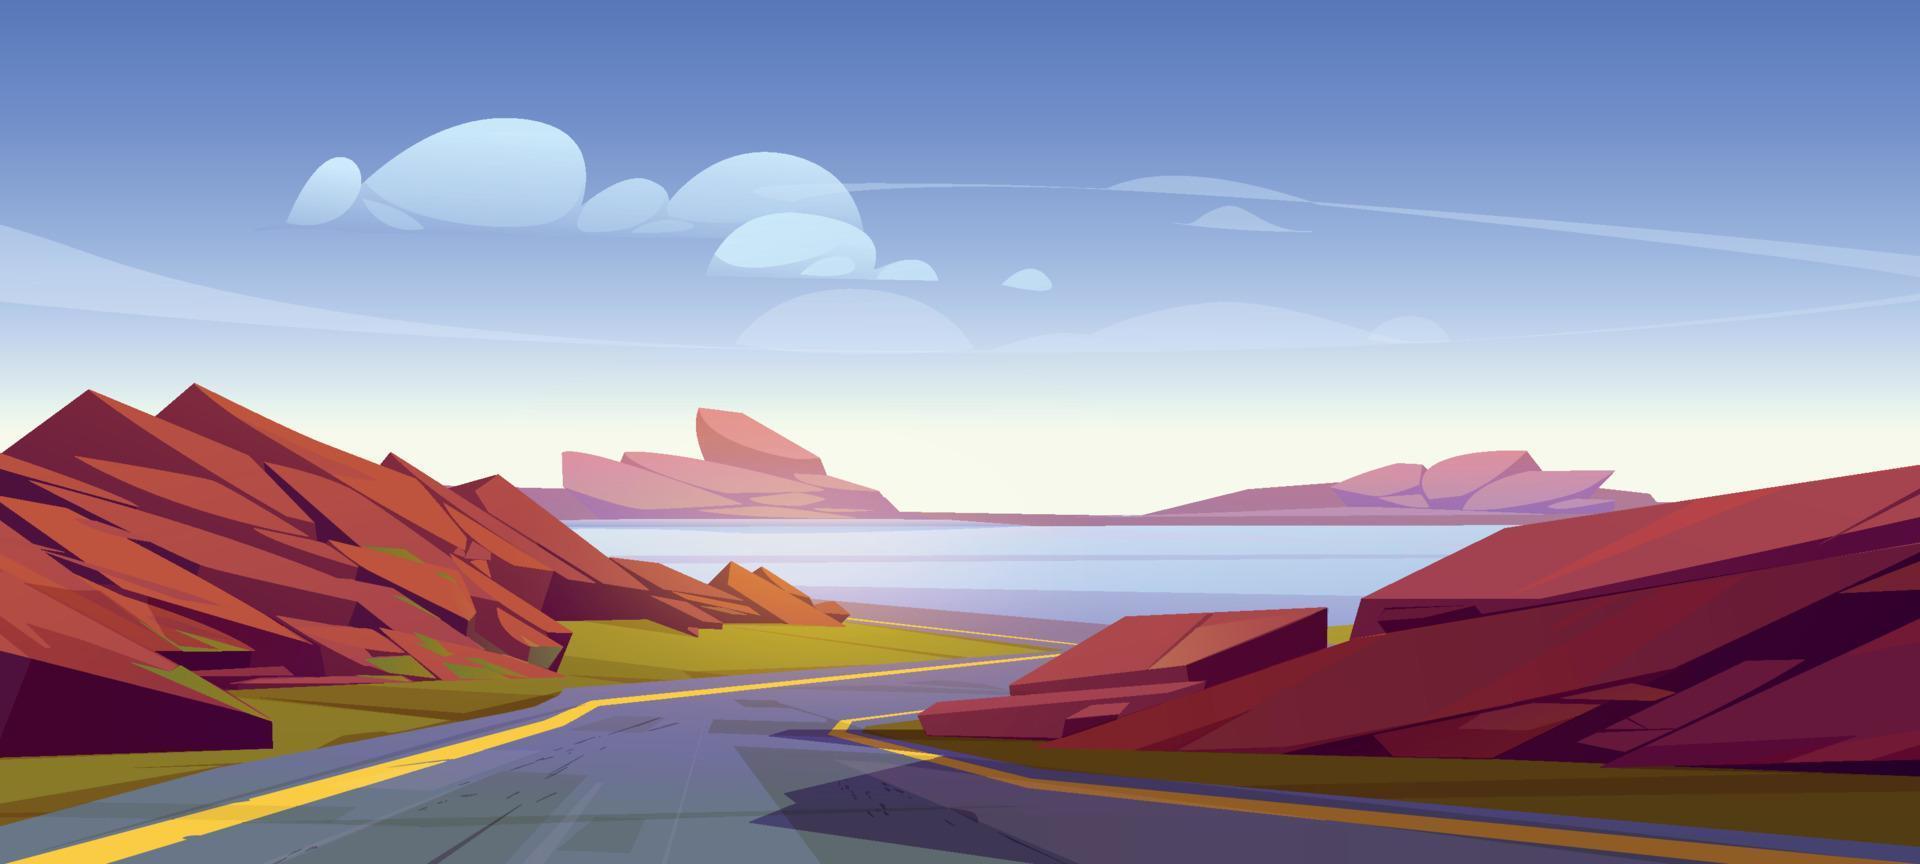 Mountain view road cartoon landscape background vector